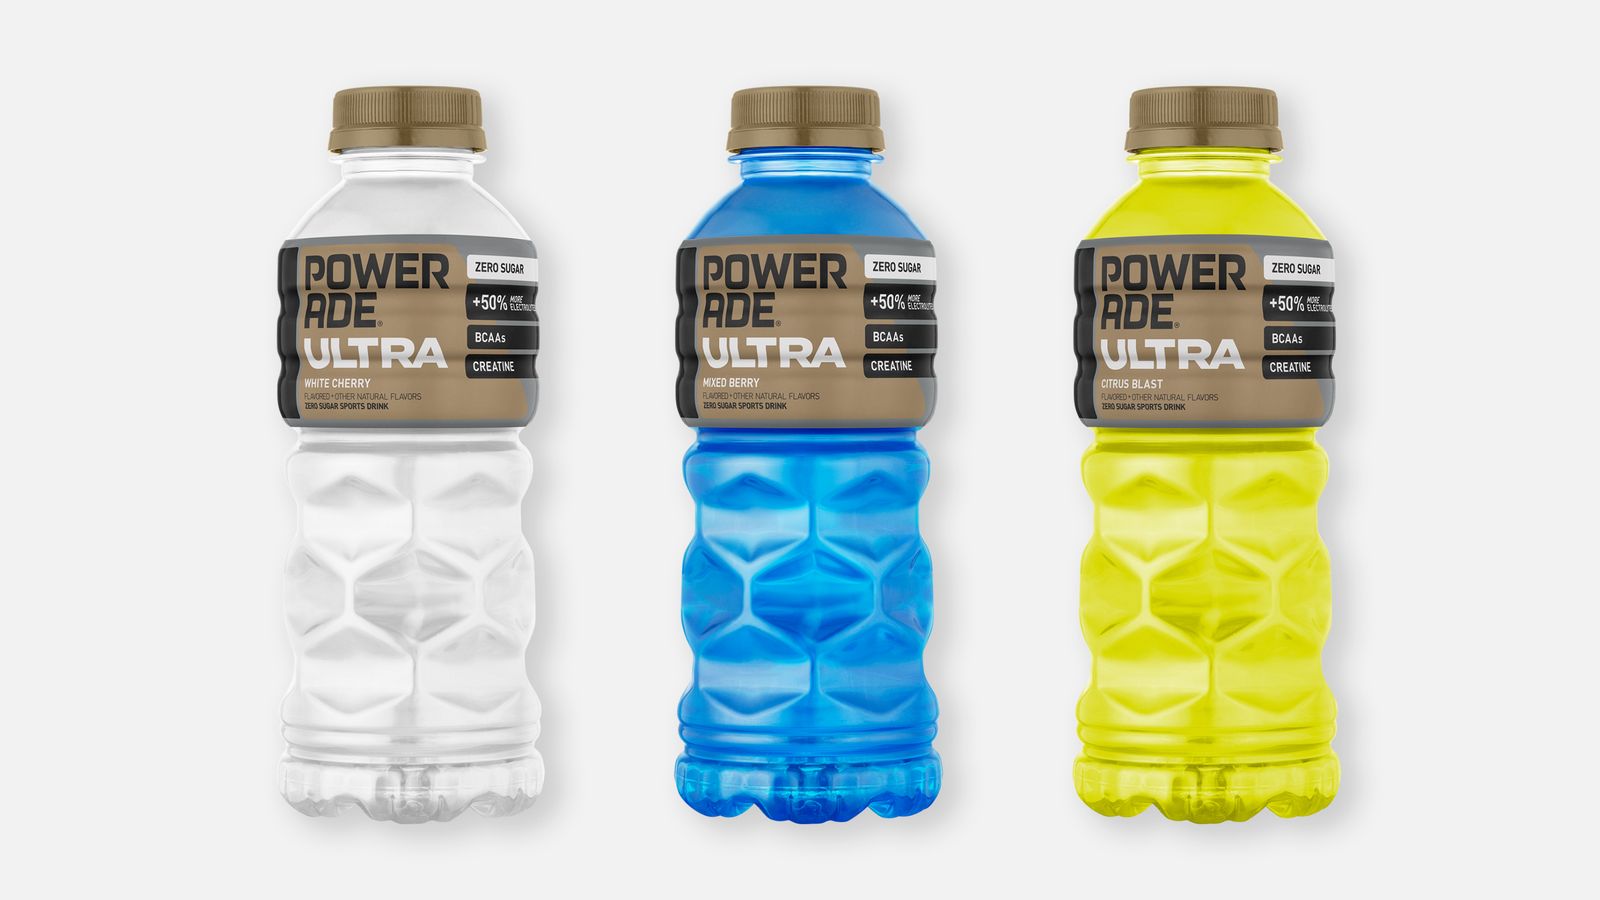 20-refreshing-facts-about-powerade-nutrition